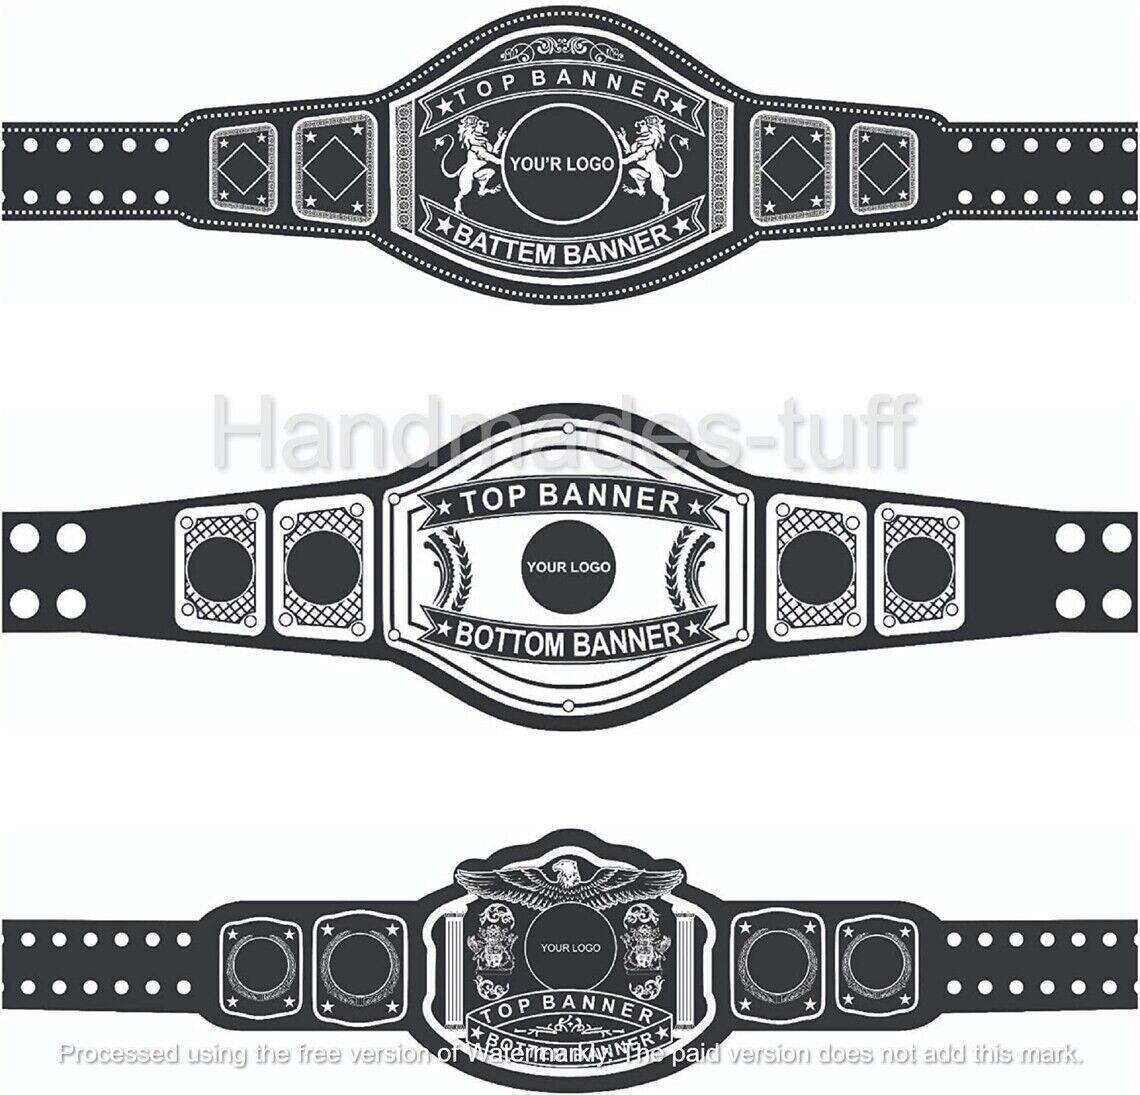 Customize Title Belt Customize your belt according to your need. 2mm Adult Size